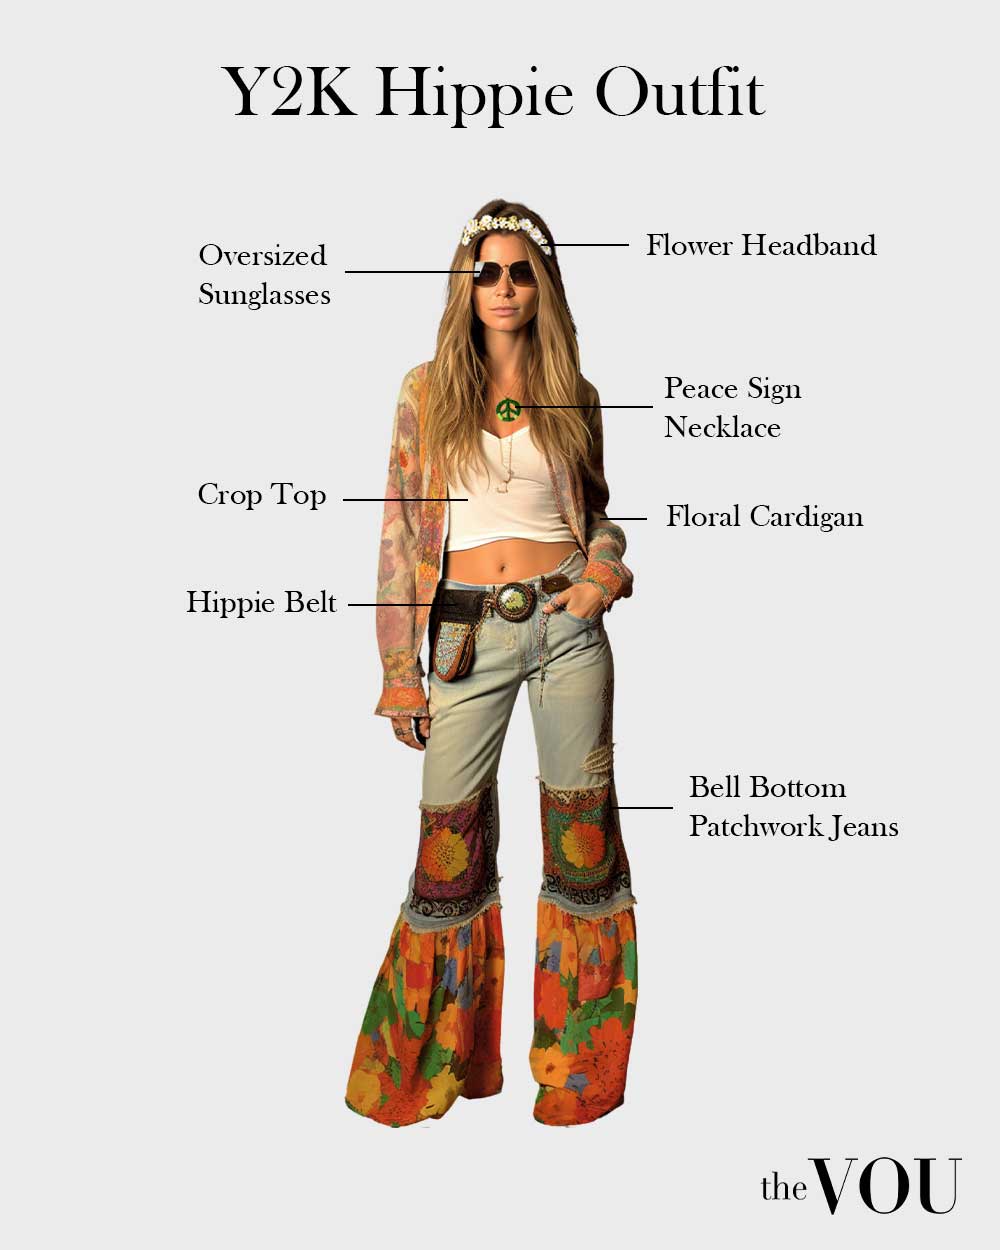 Y2K Hippie Style outfit